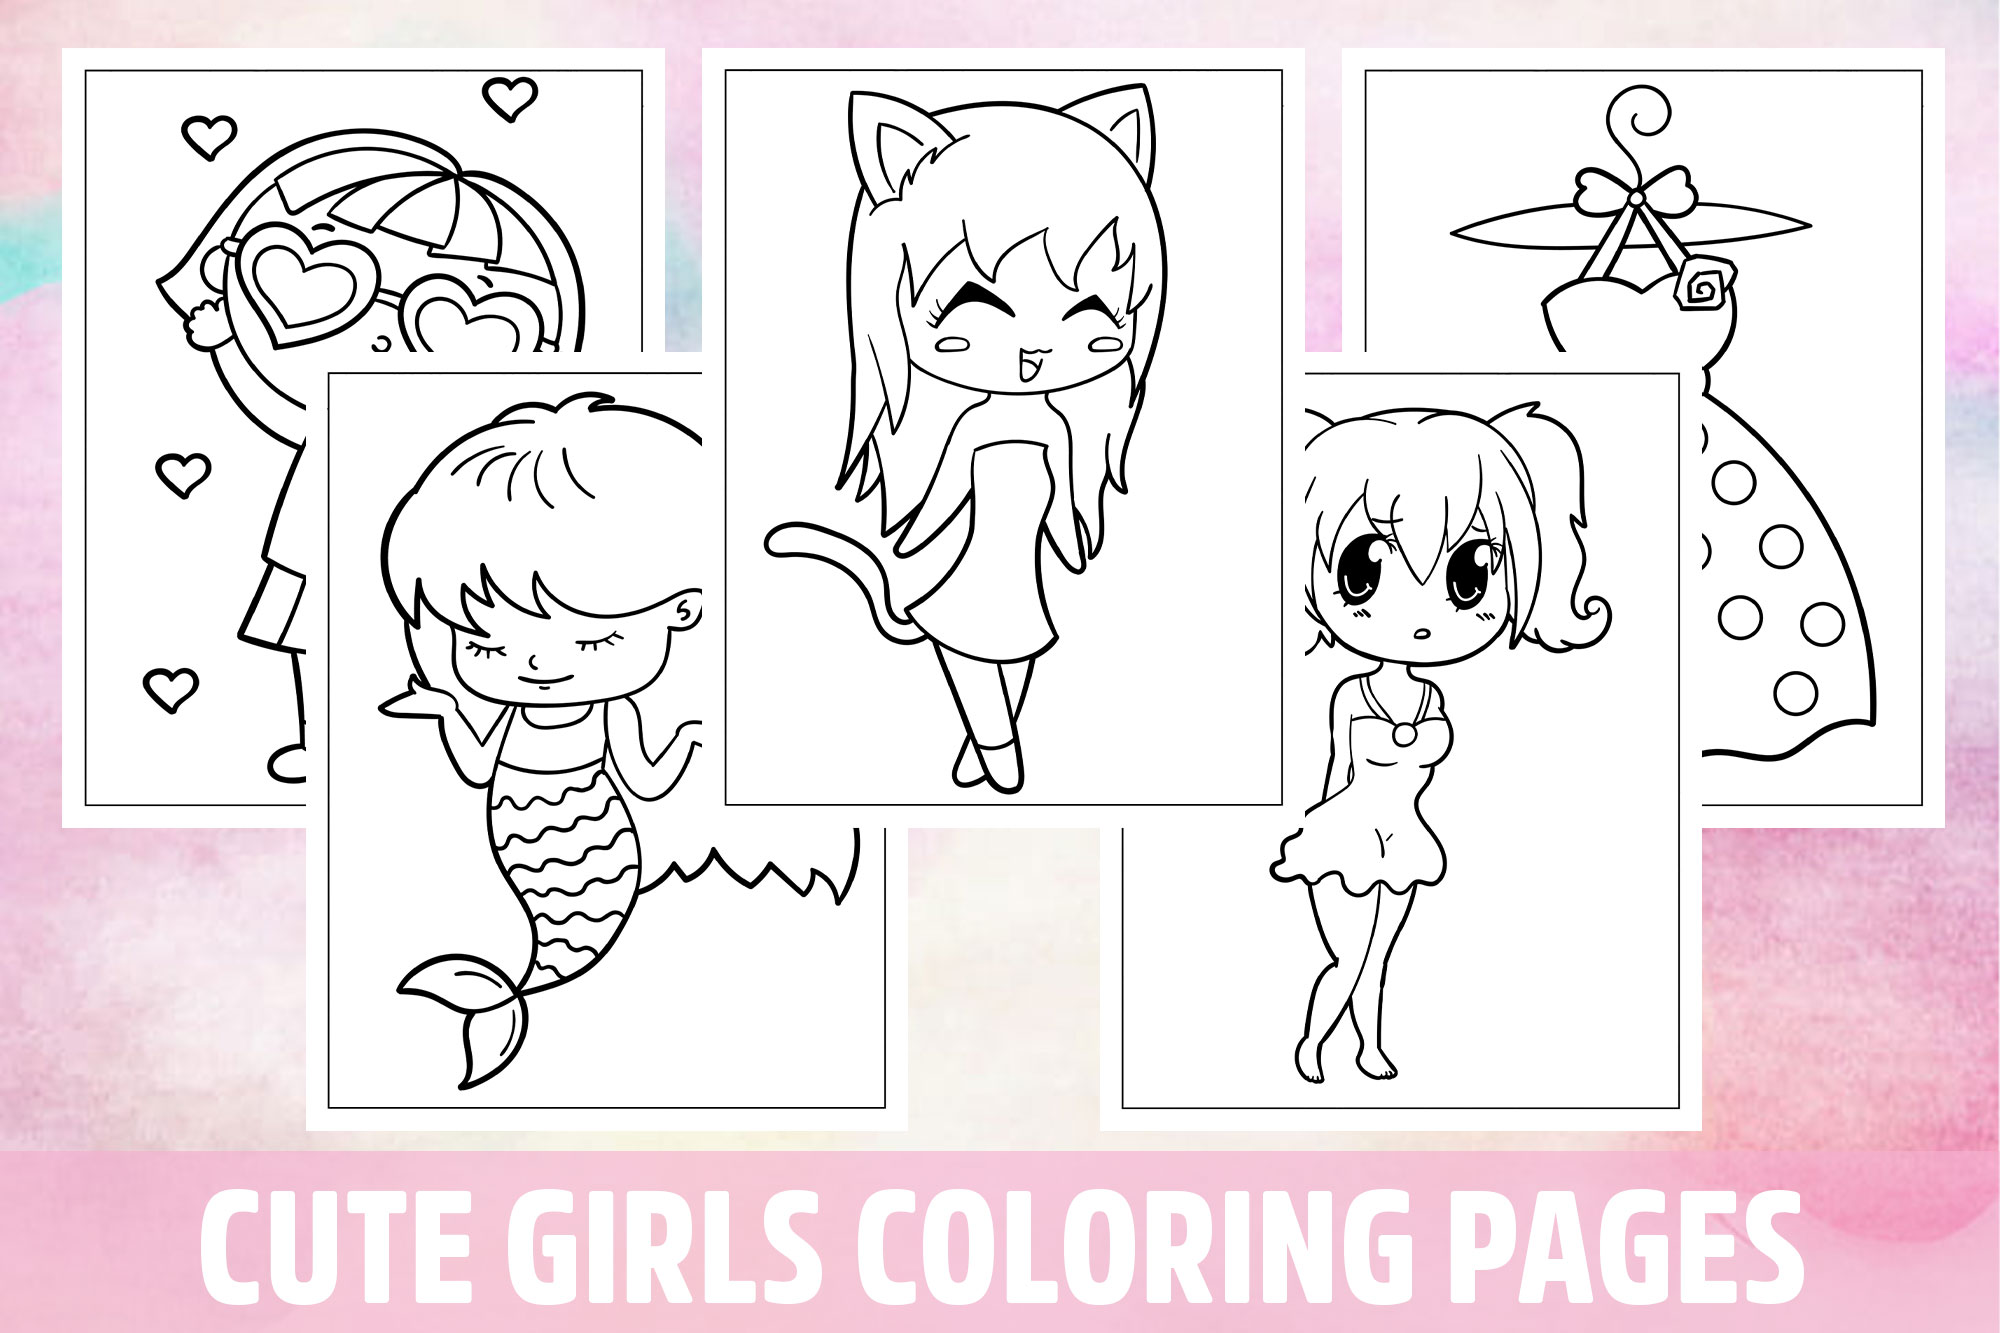 Cute girls coloring pages for kids girls boys teens birthday school activity made by teachers